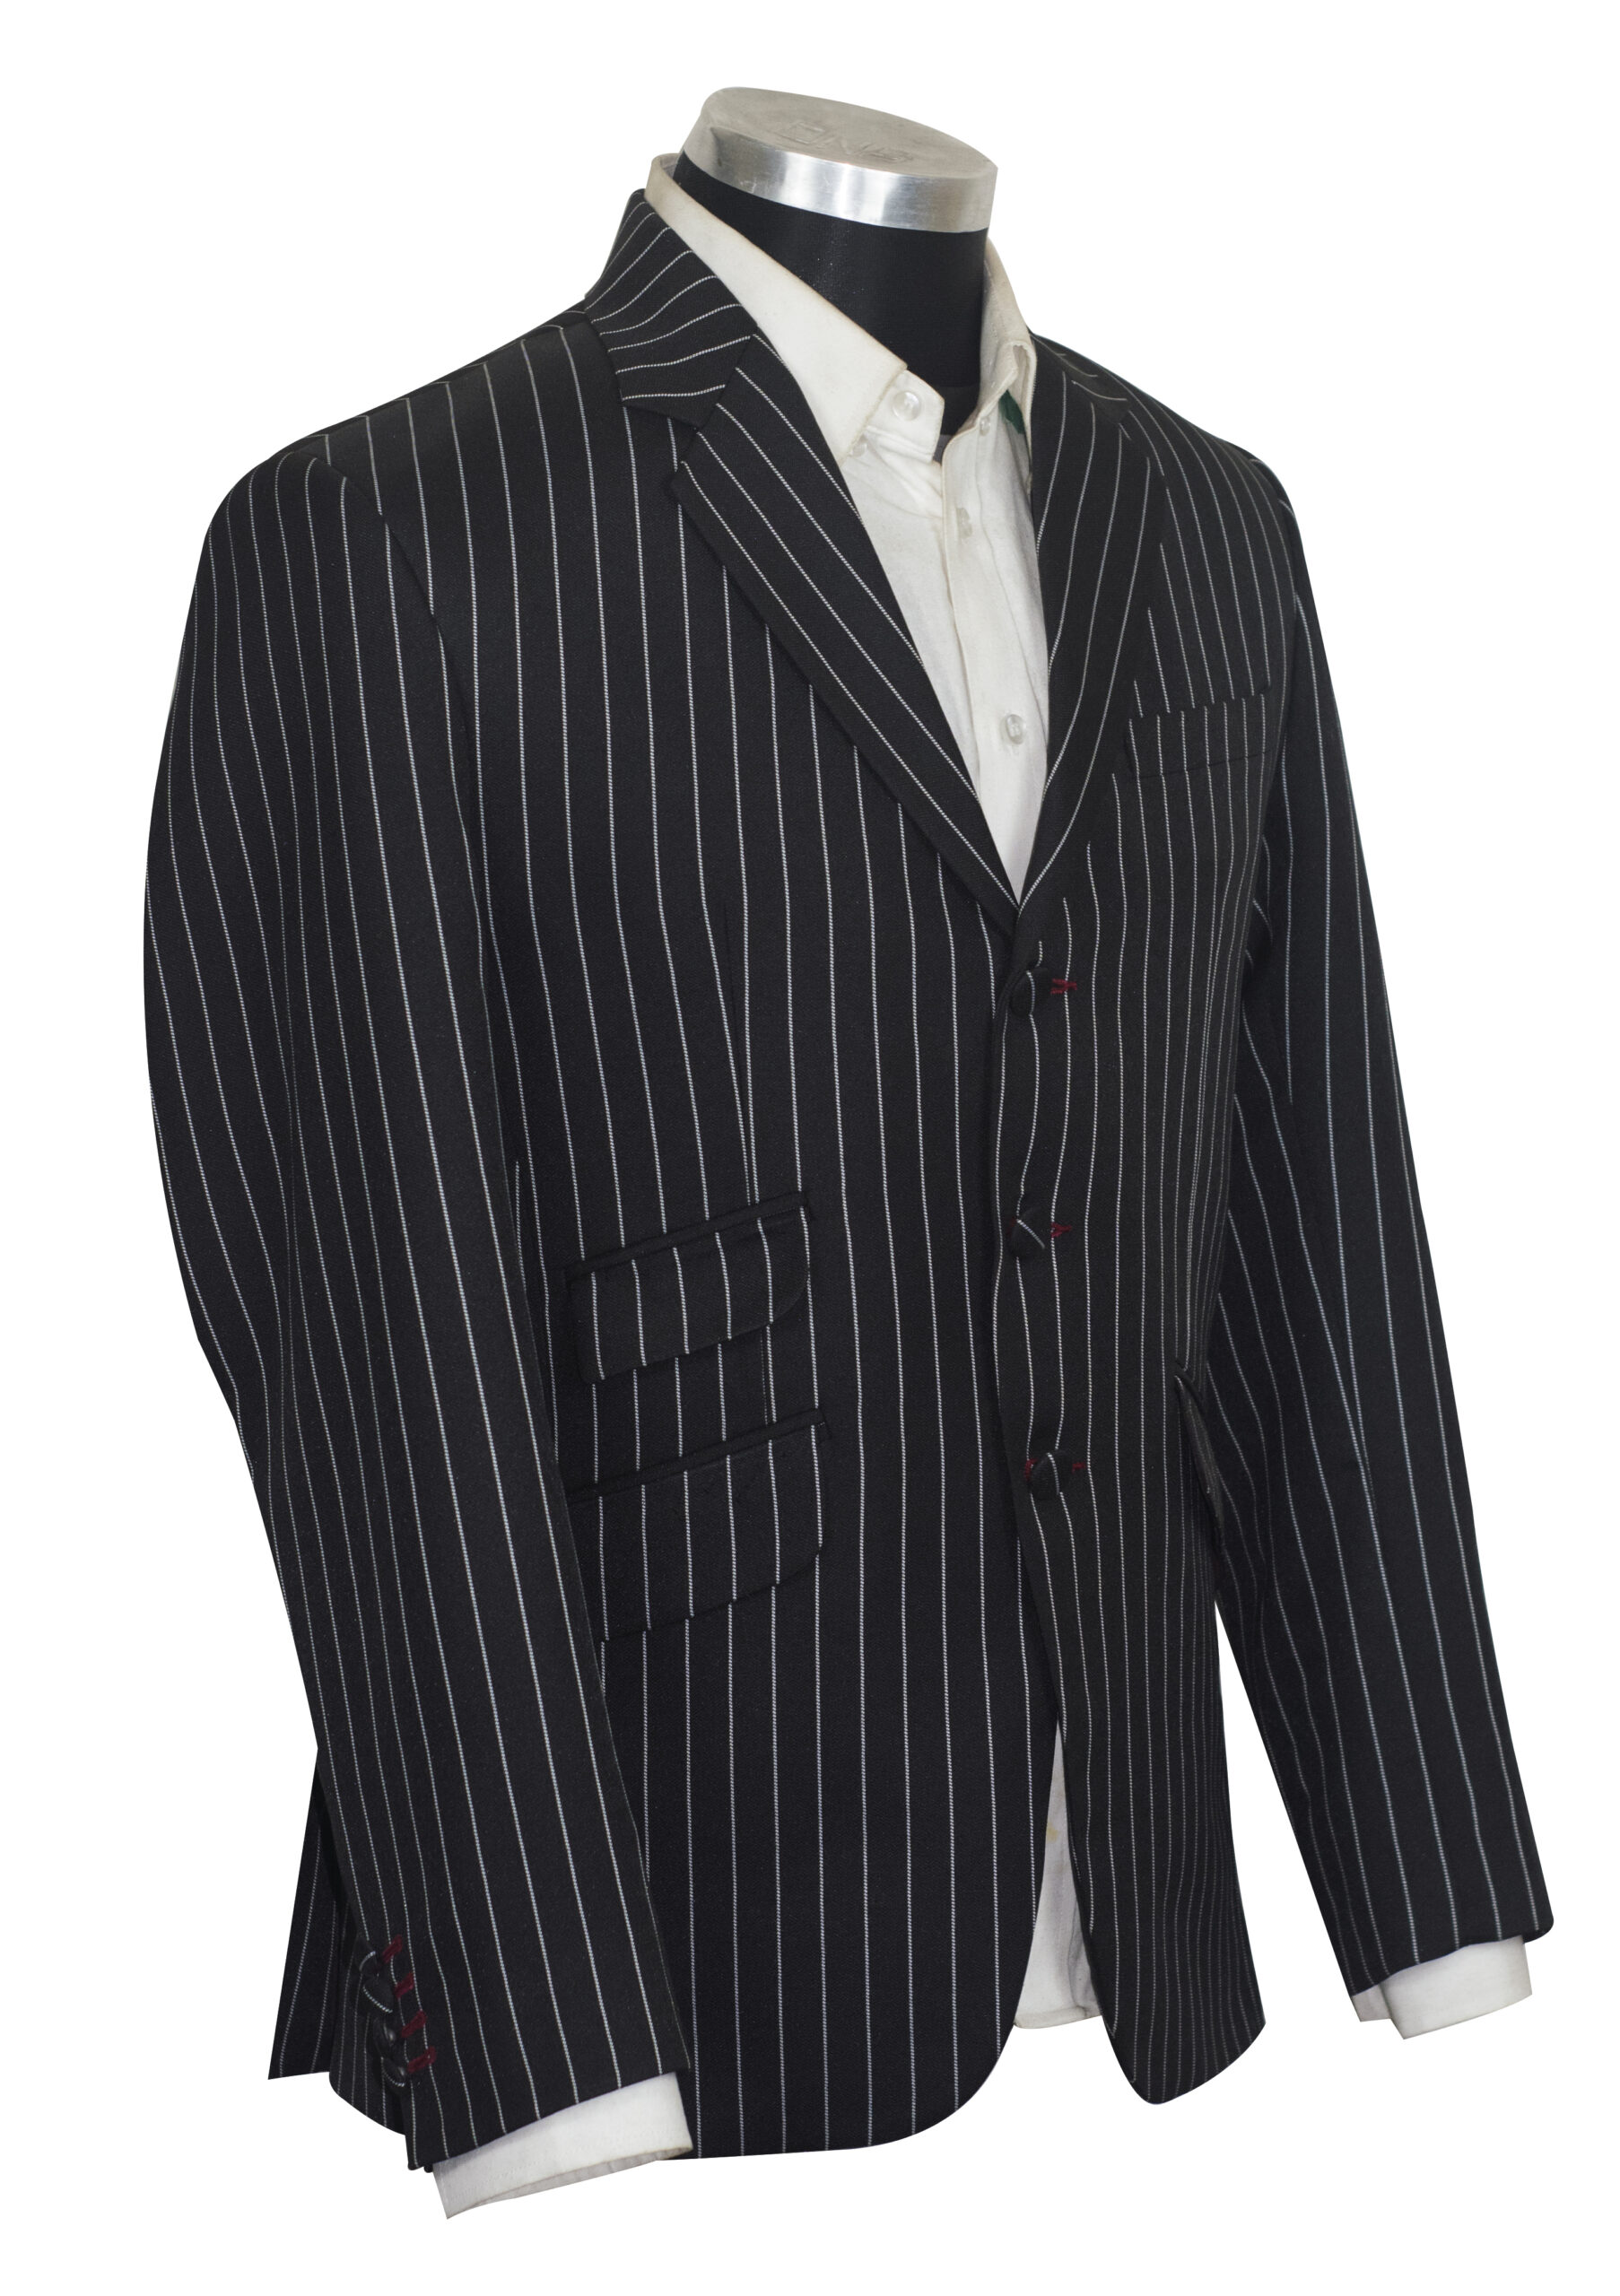 Striped Suit | Vintage Style White in Black Pinstripe Mod Suits